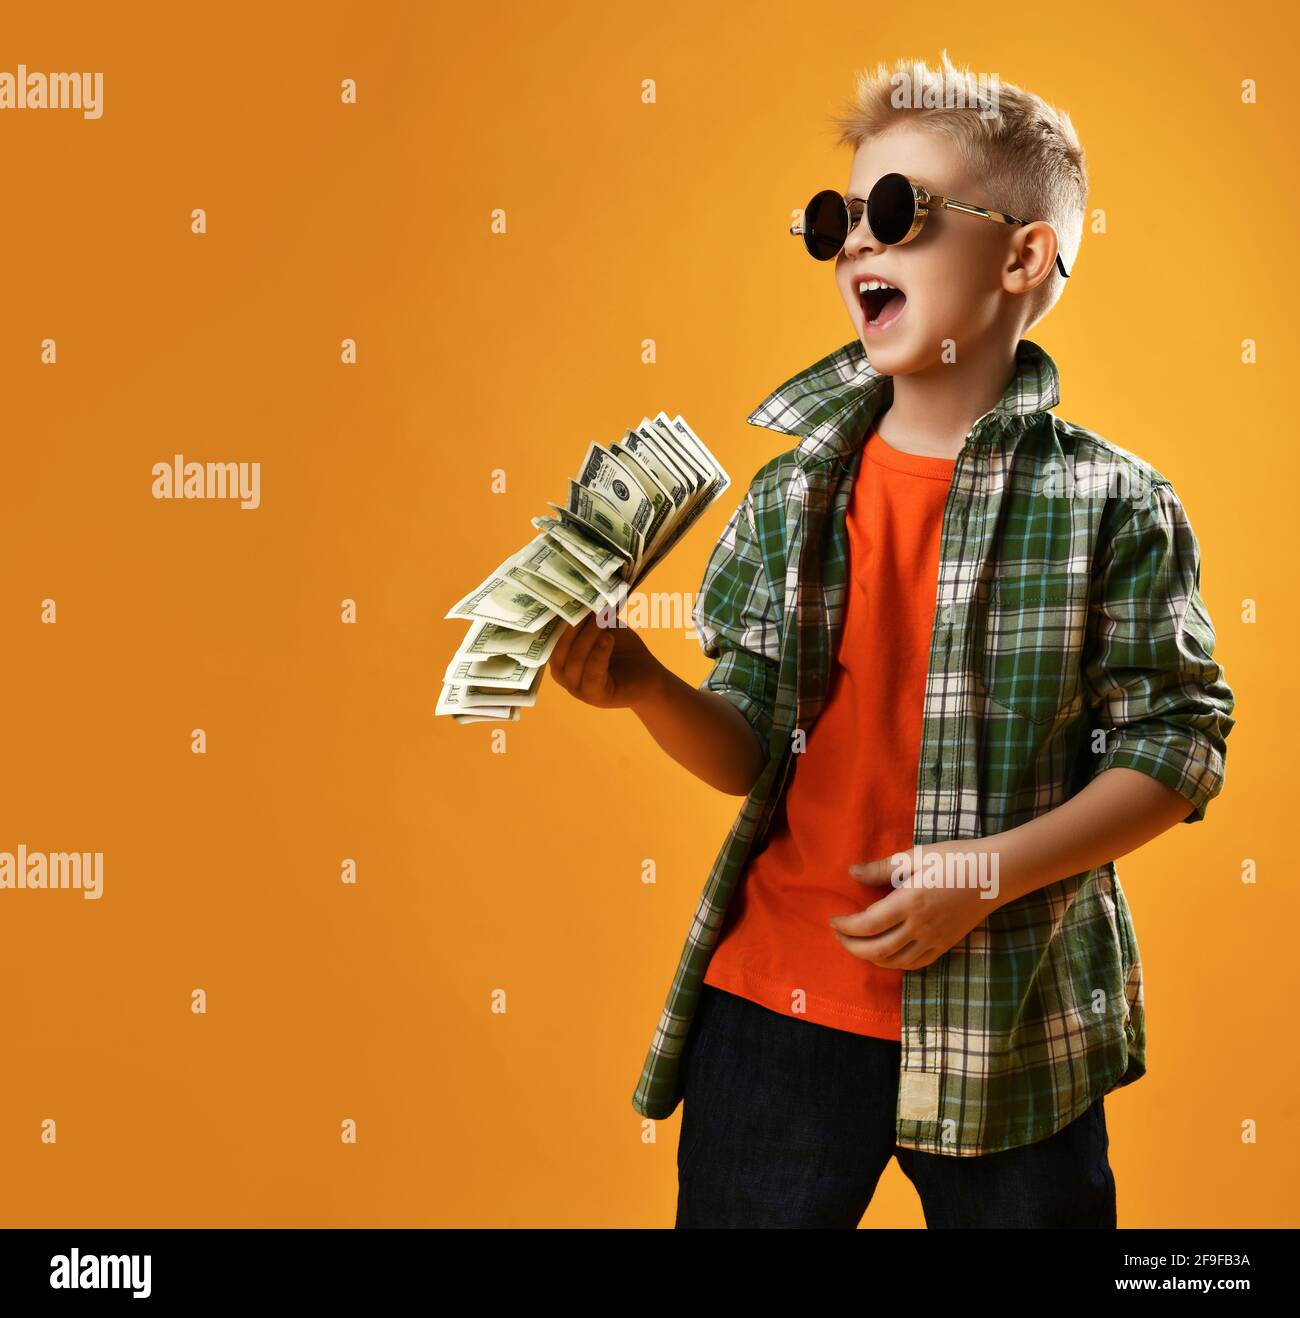 Blond smiling boy child in checkered shirt and sunglasses standing holding heap of money cash dollars in hands having fun Stock Photo